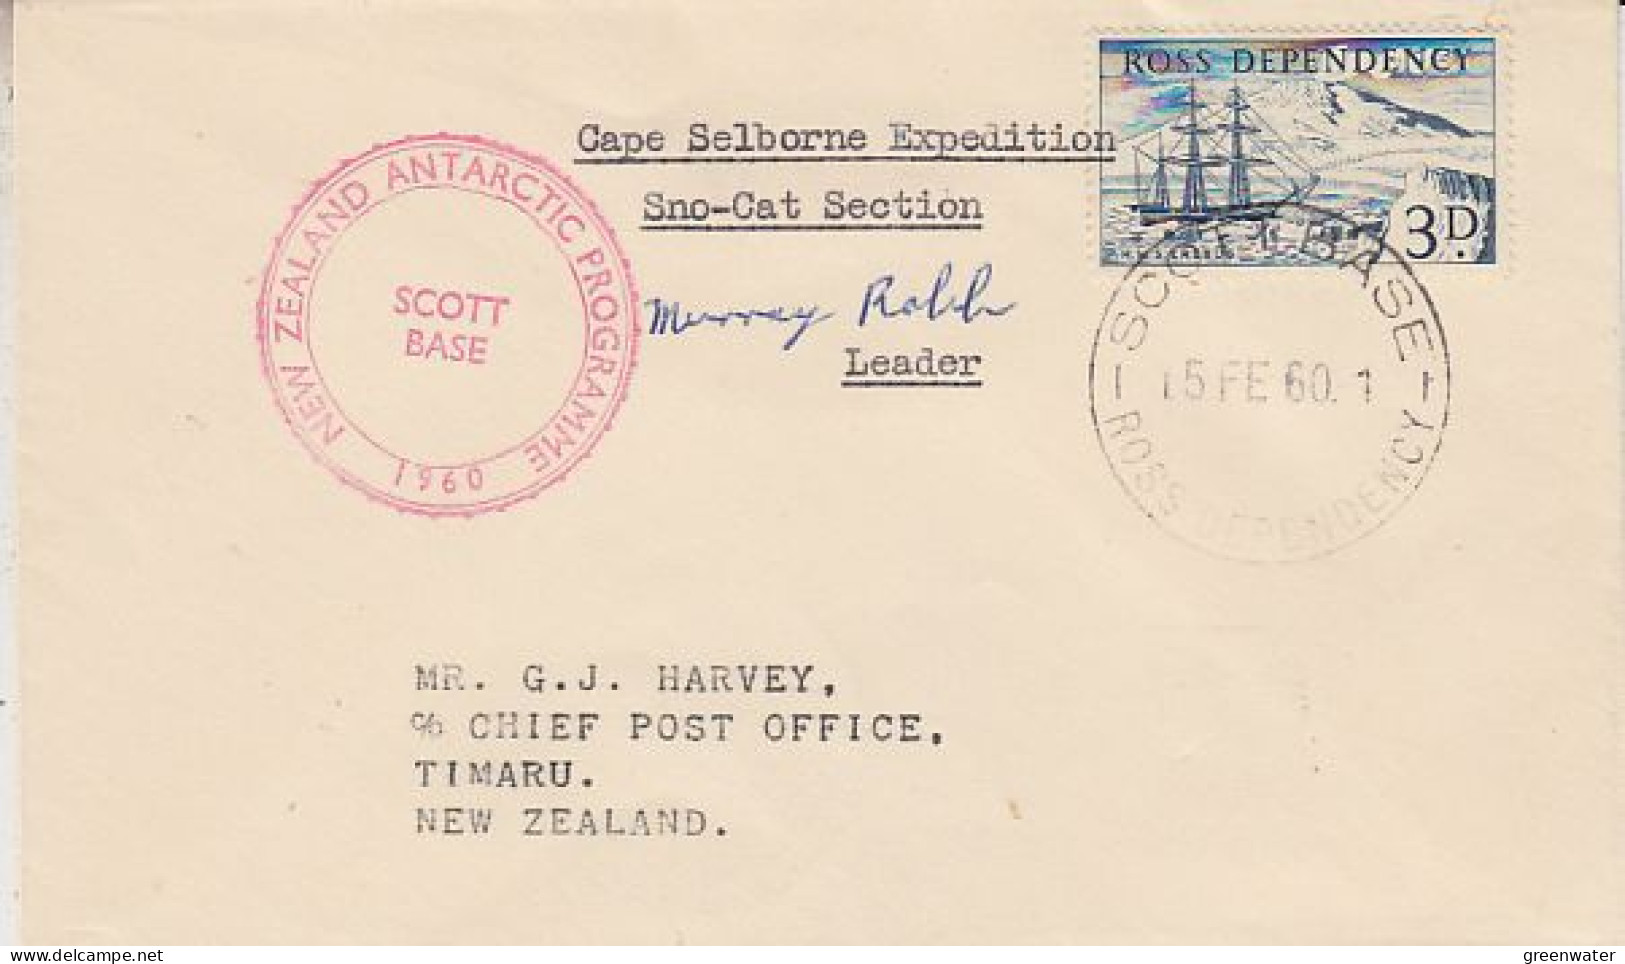 Ross Dependency Cape Selborne Expedition Sno-cat Section Signature Leader Ca Scott Base 15 FEB 1960 (RO188) - Lettres & Documents